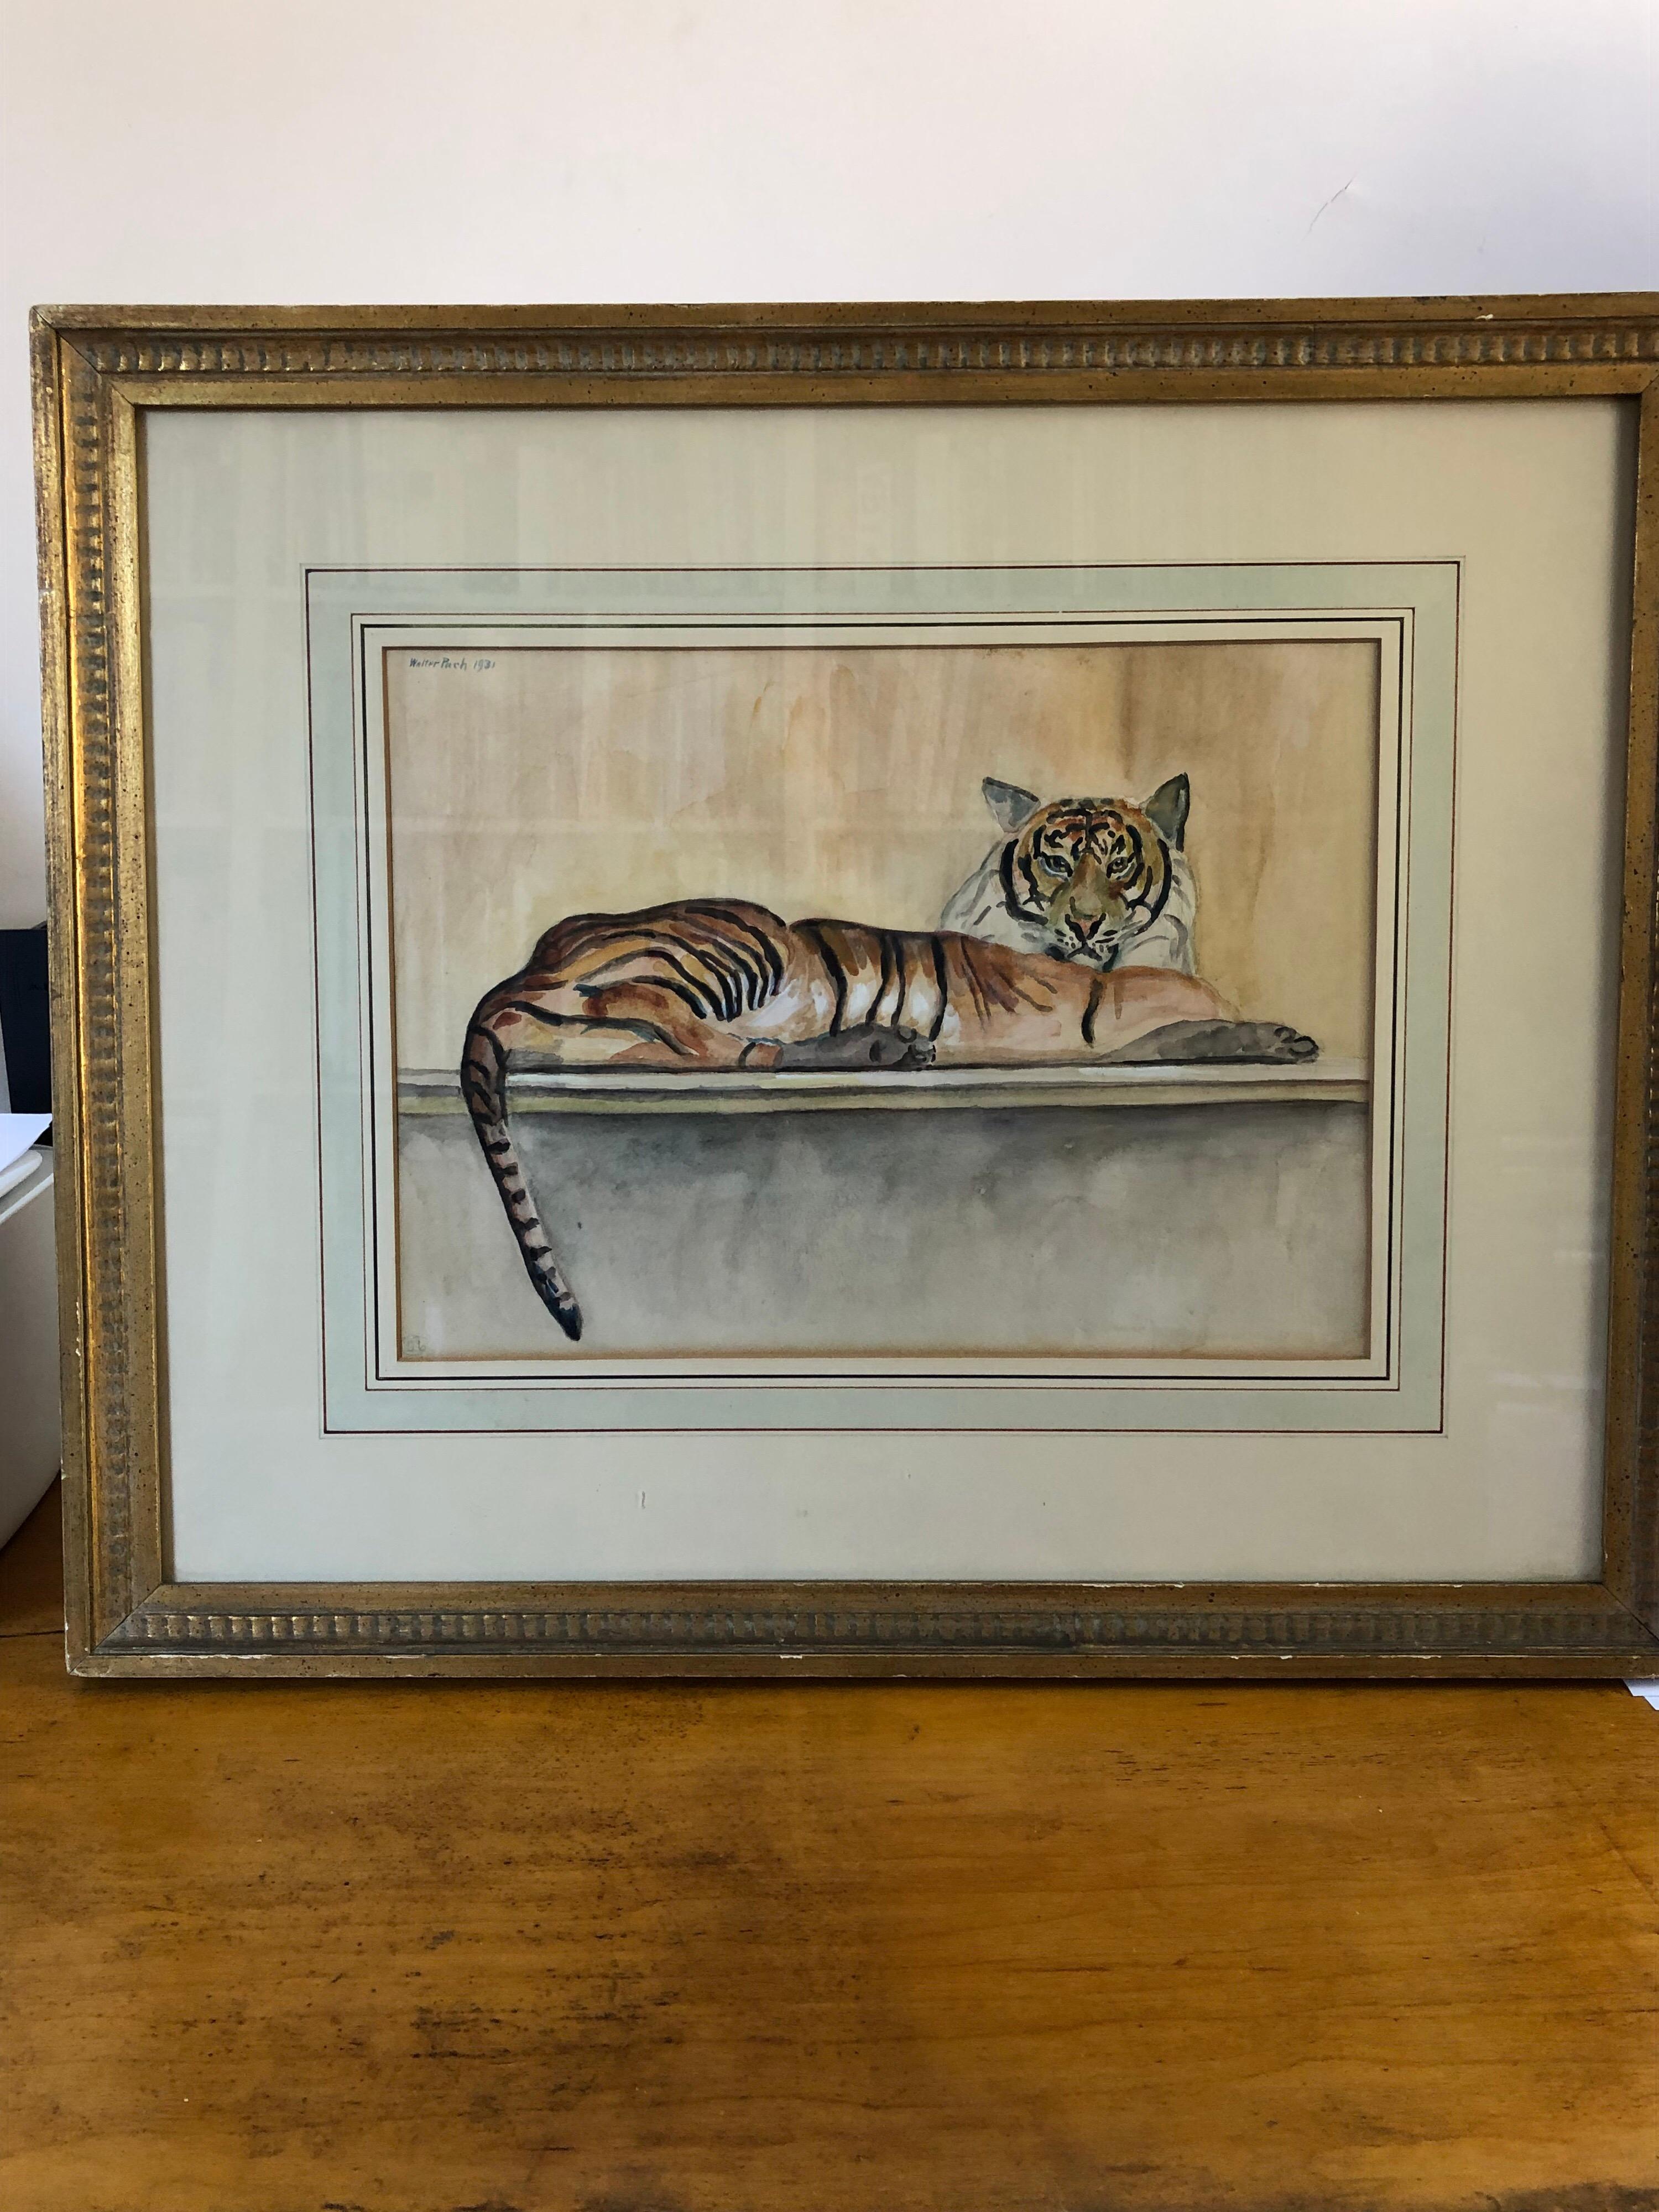 Tiger tiger burning bright! Walter Pach (1883-1958) watercolor and pencil drawing of a reclining tiger. Signed Walter Pach and dated in upper left. Inscribed '26' lower left and inscribed on the back of frame 